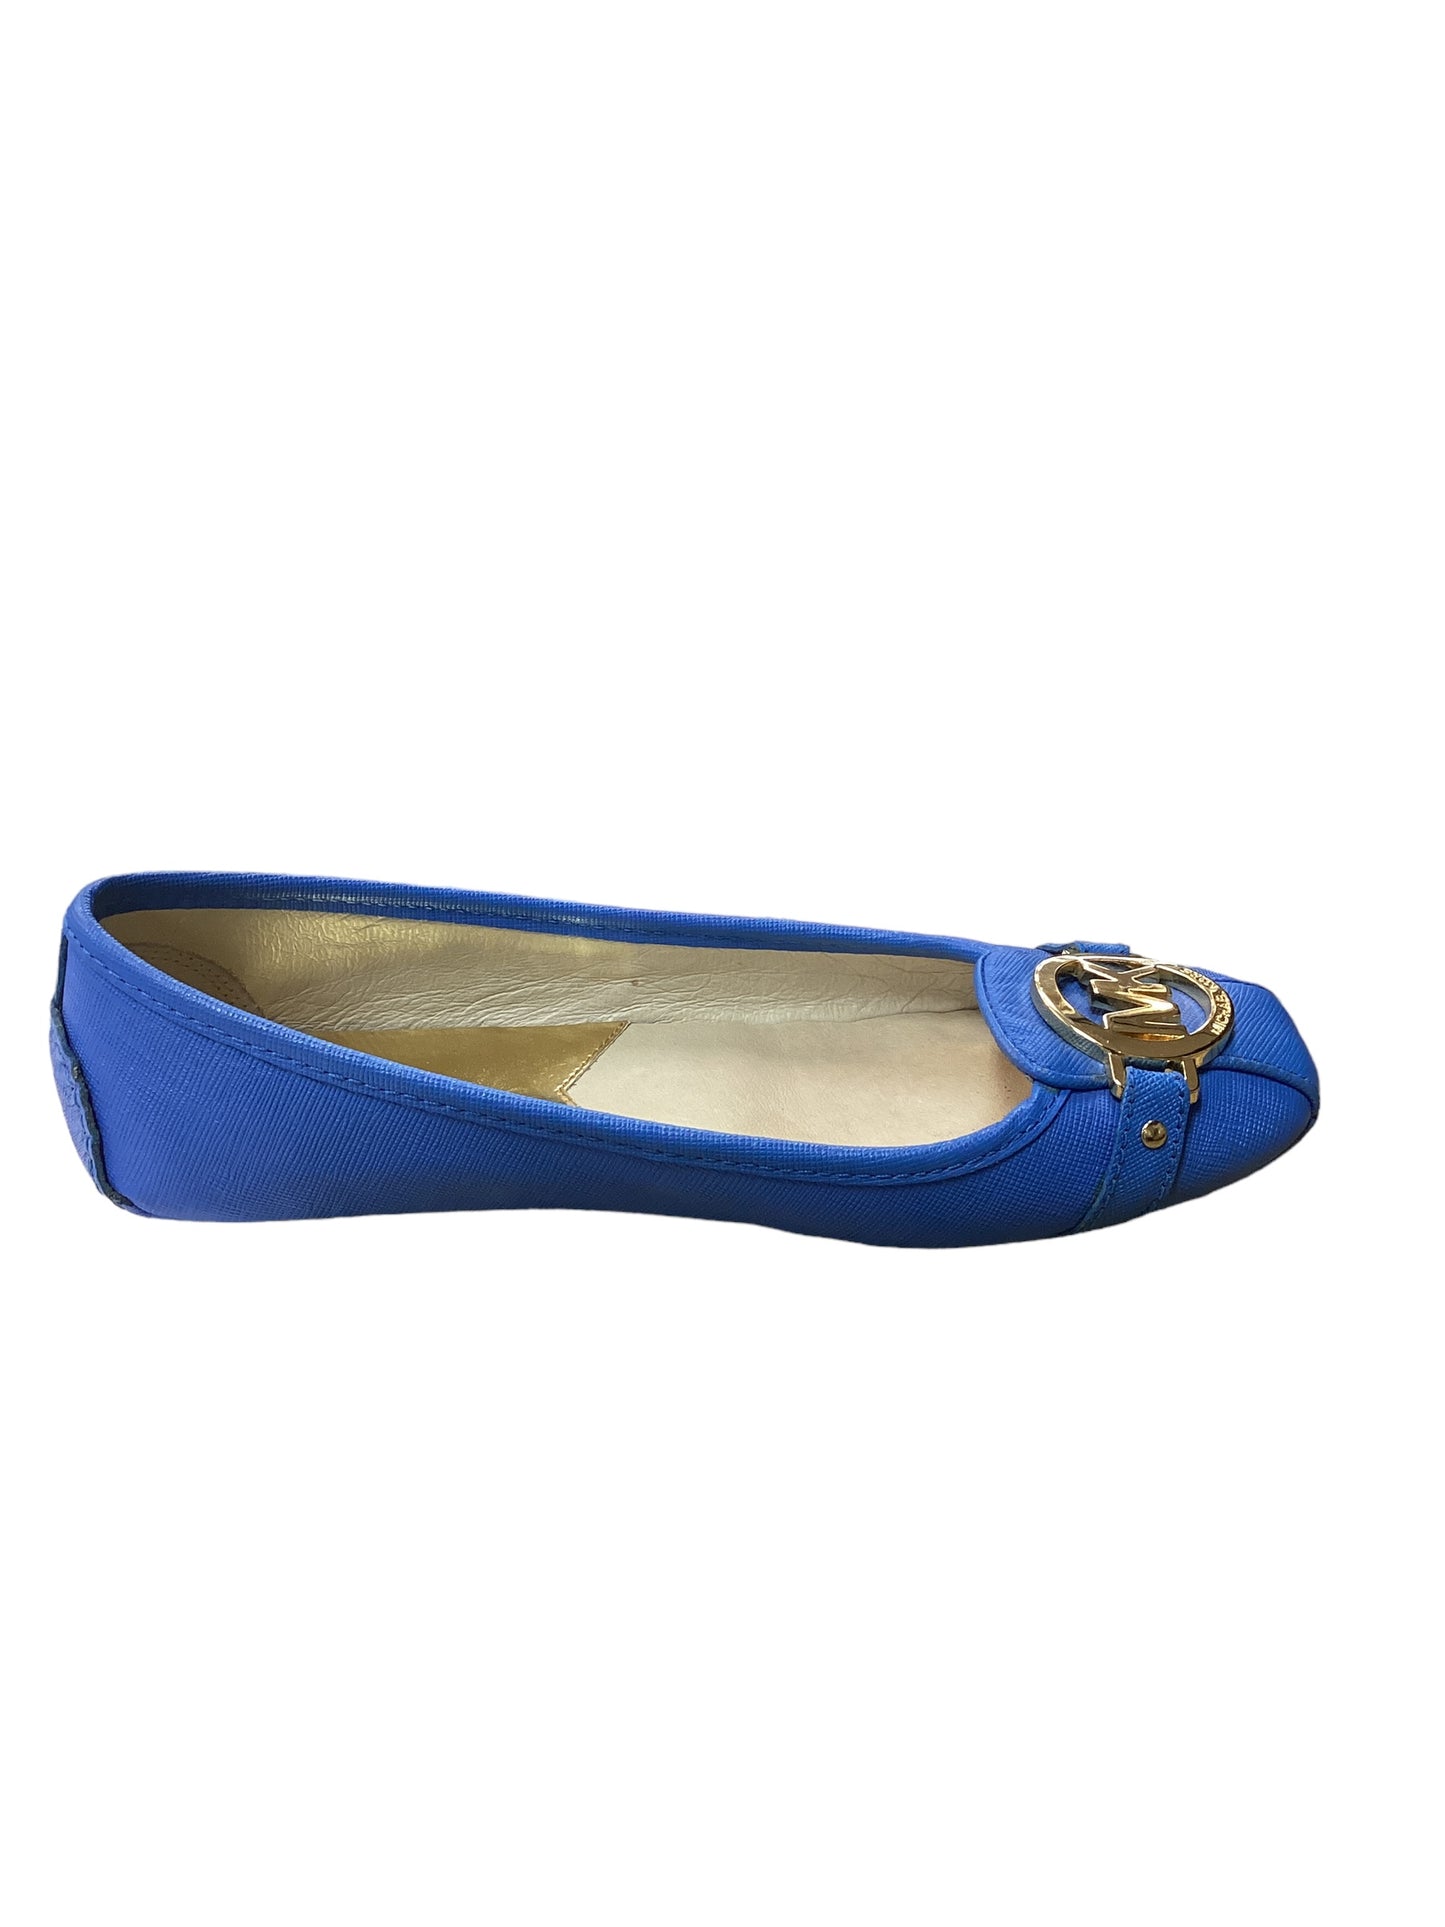 Shoes Flats Ballet By Michael By Michael Kors  Size: 6